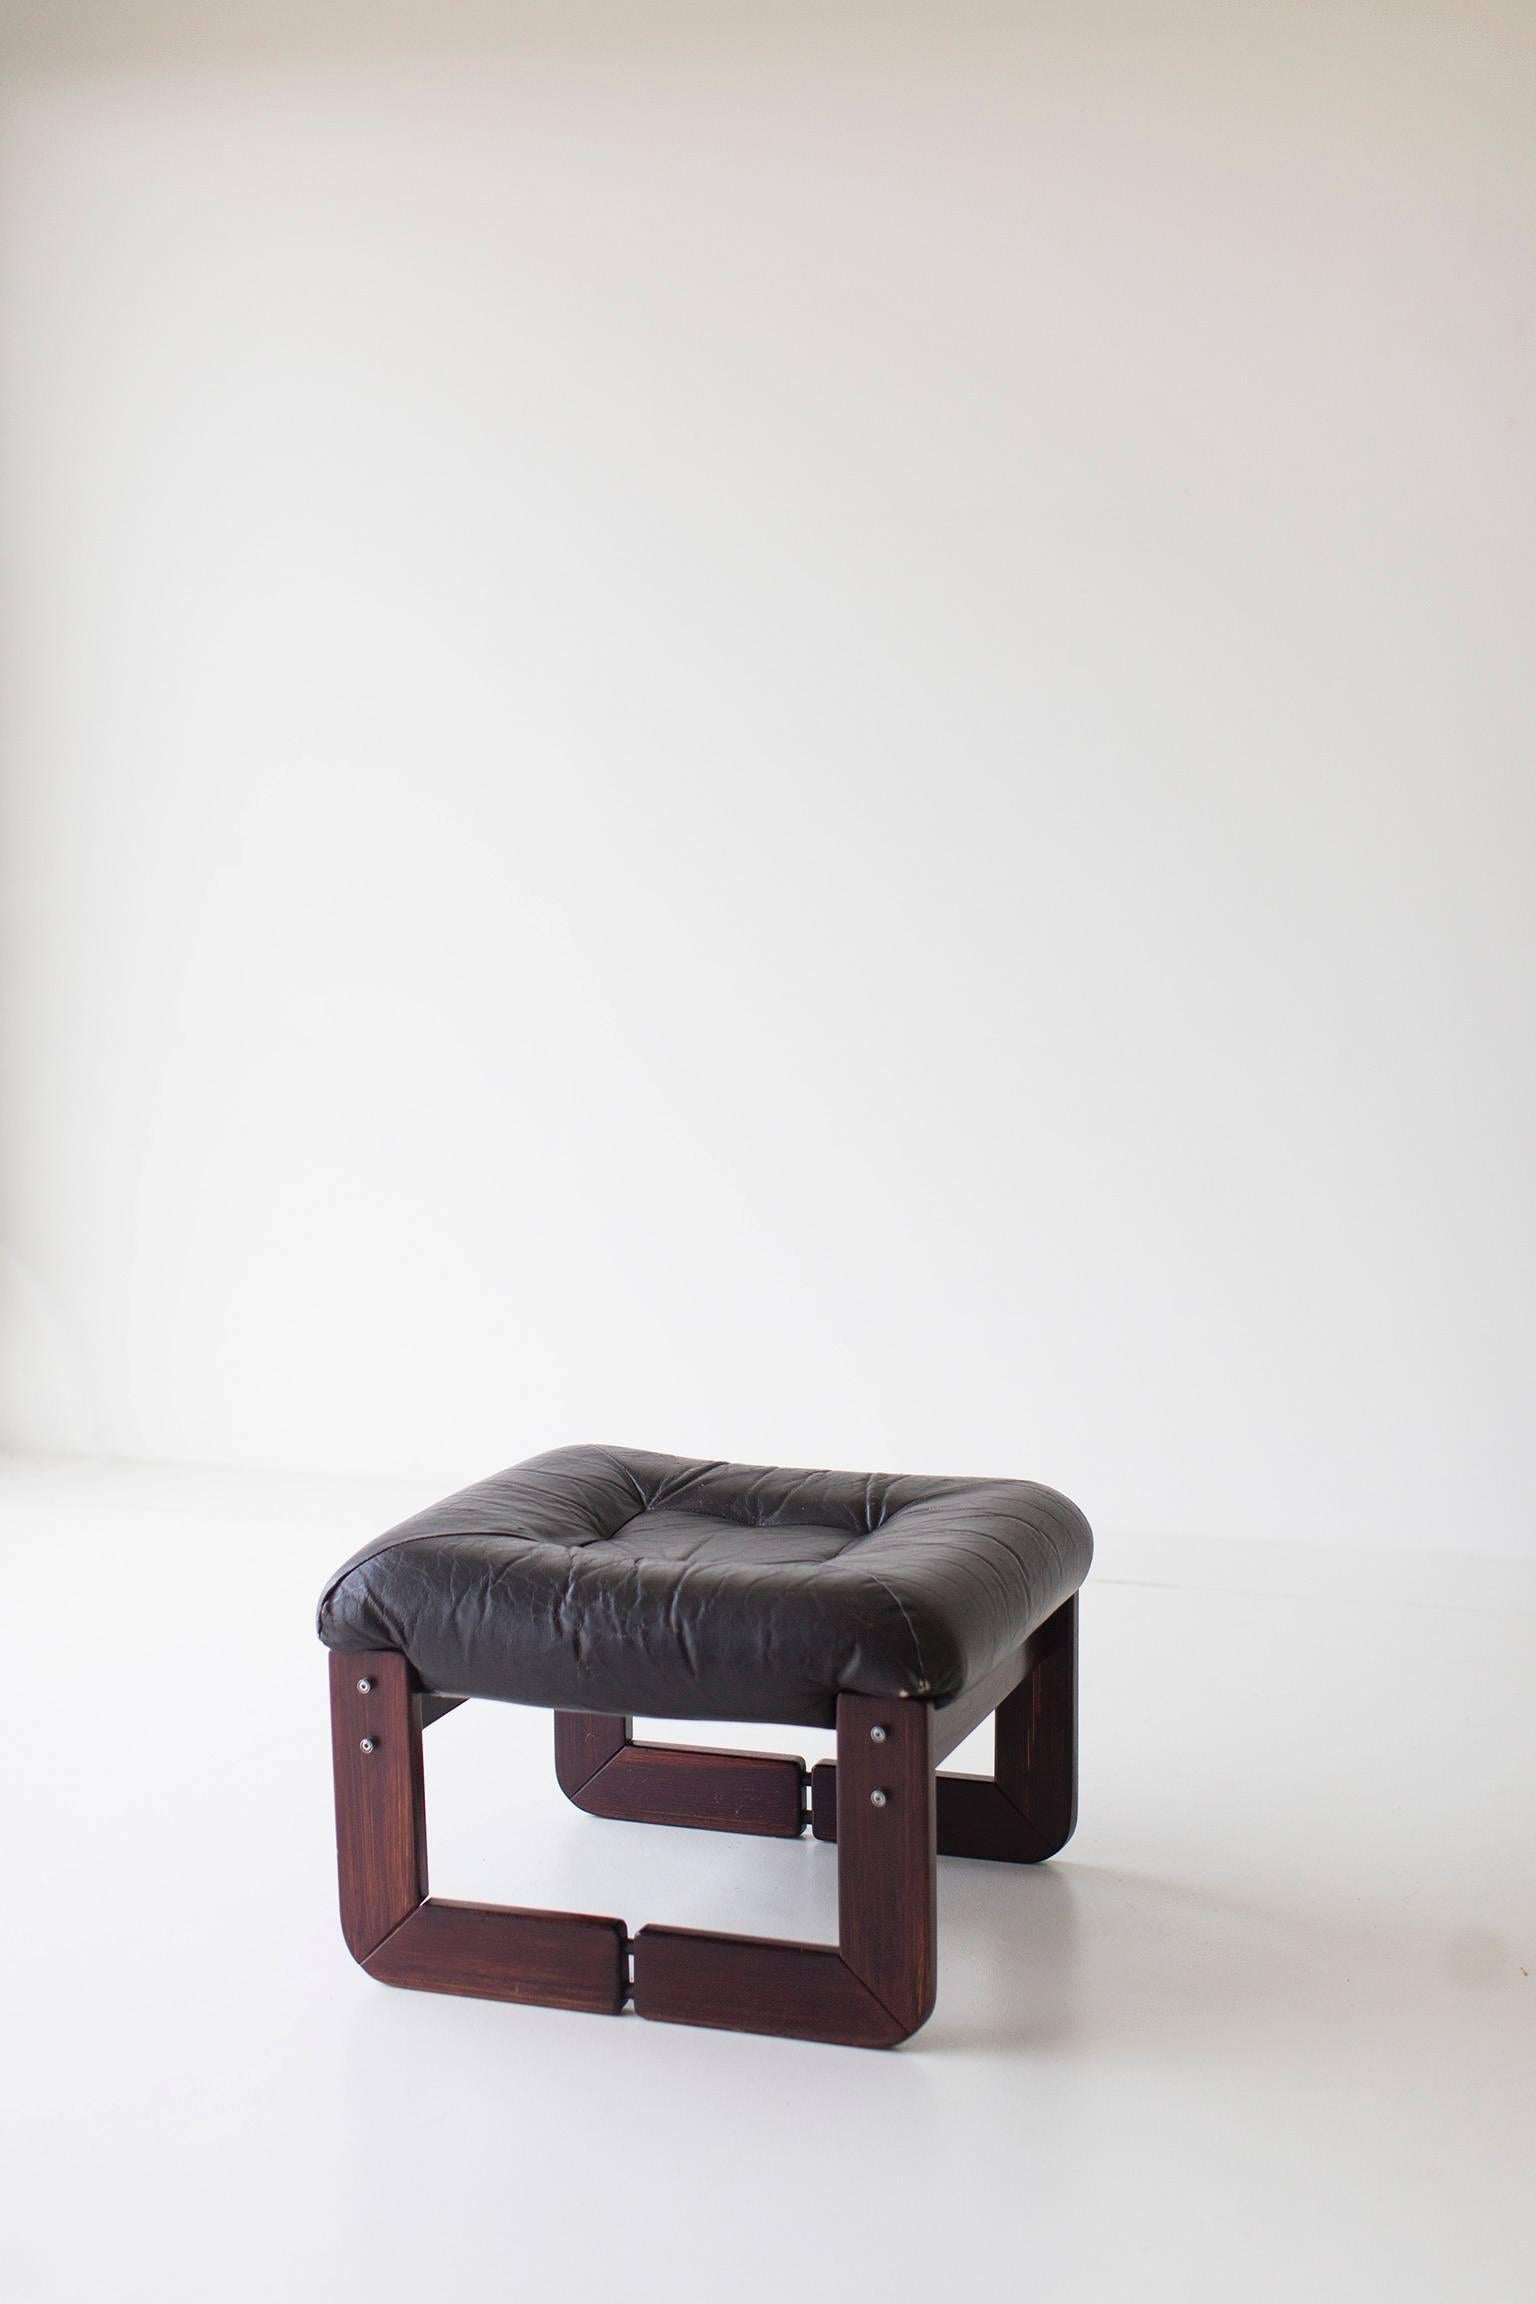 Late 20th Century Percival Lafer Rosewood and Leather Ottoman